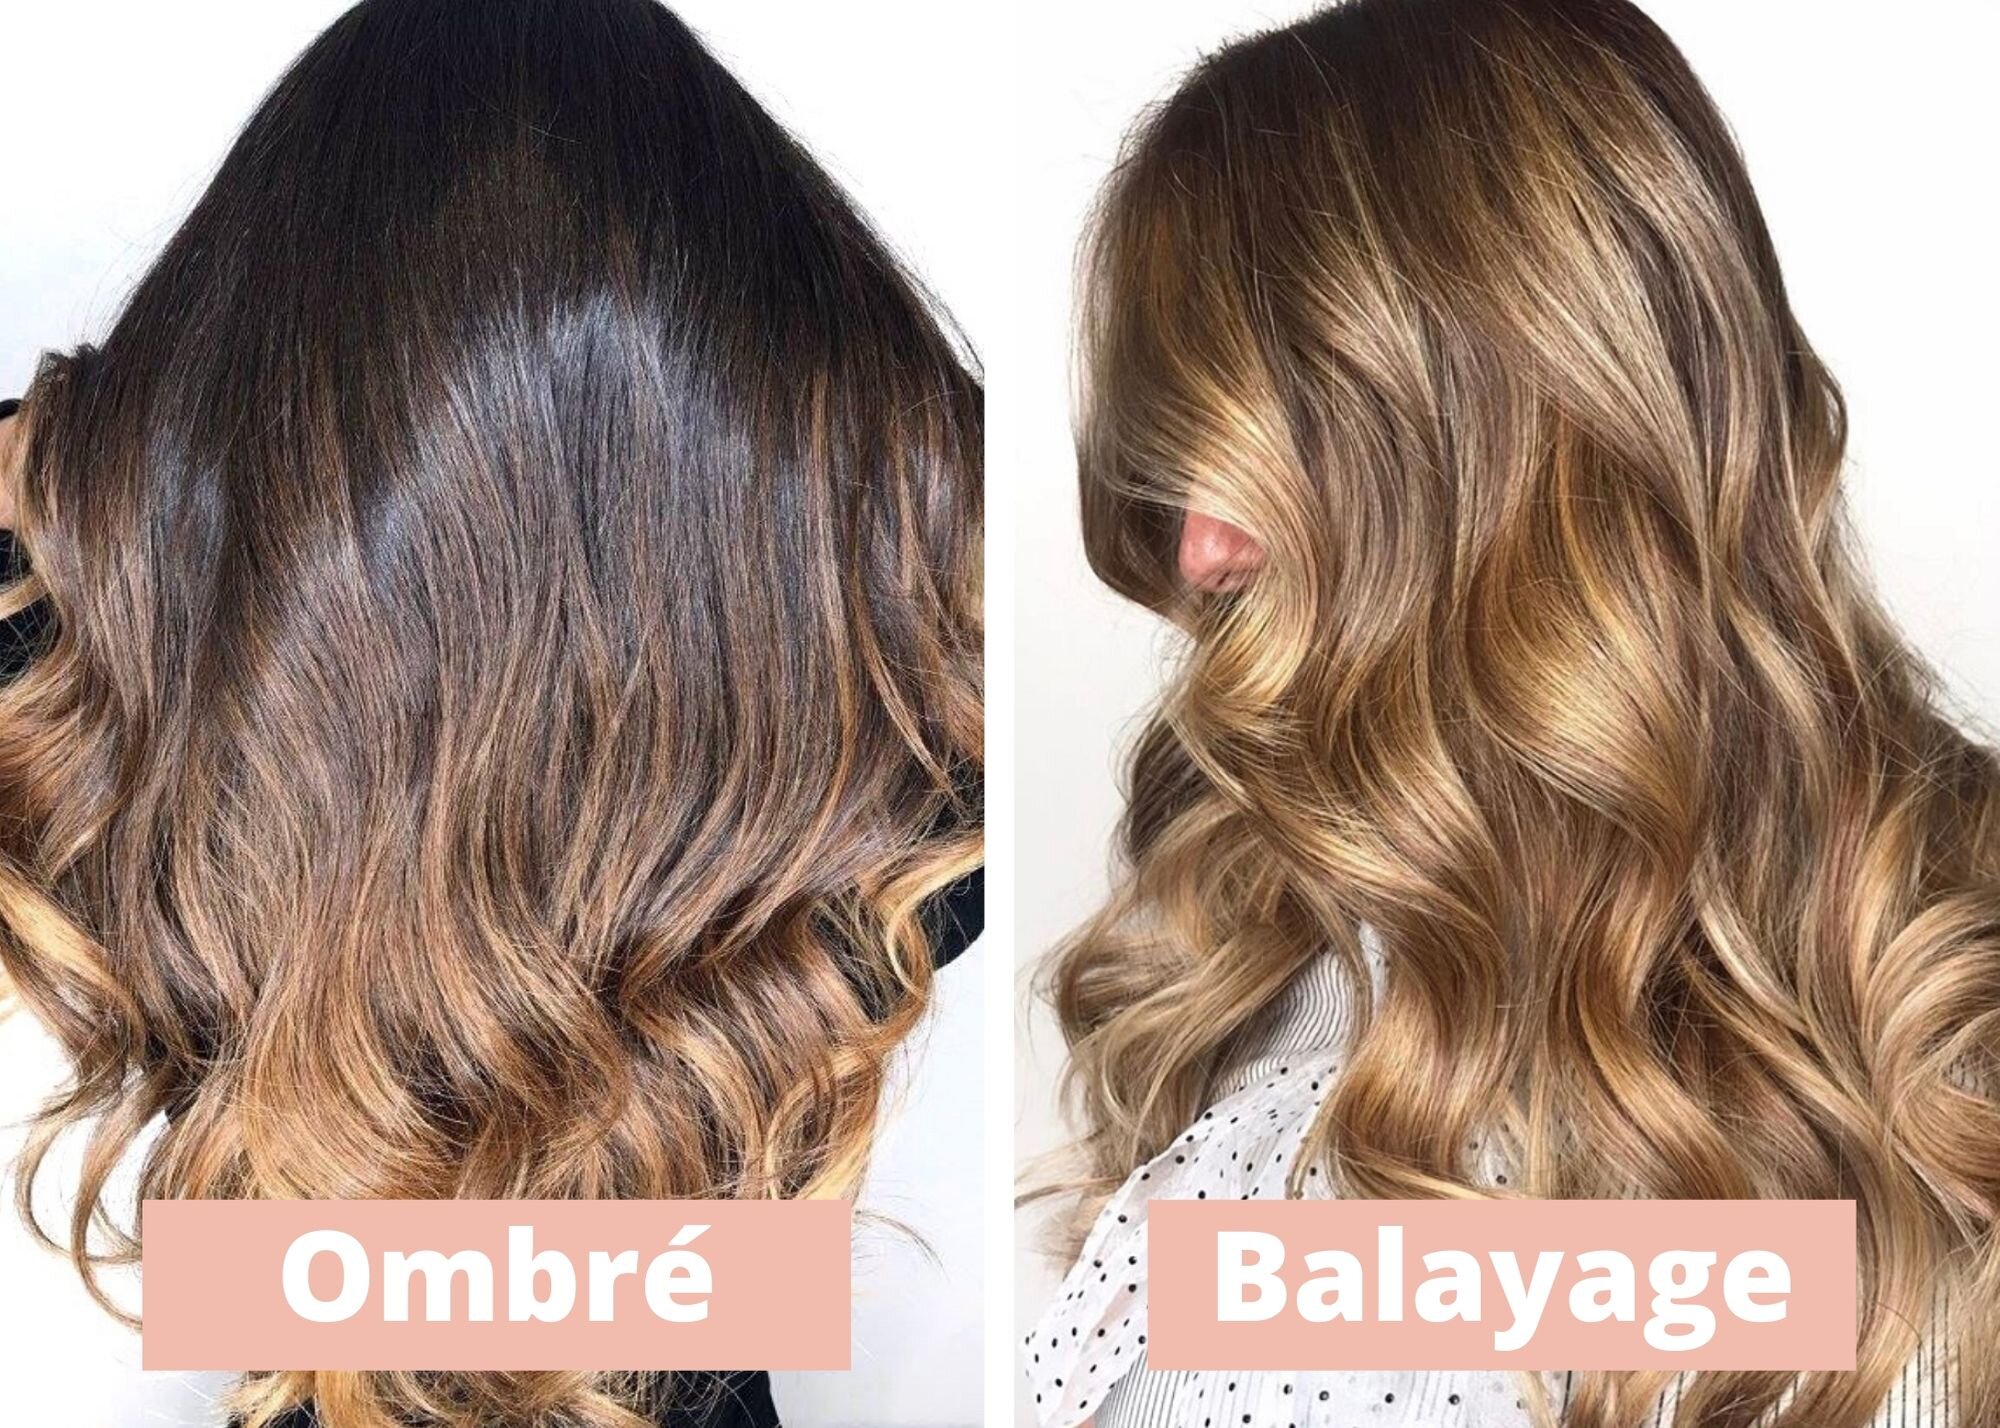 Balayage vs. Ombre - wide 10